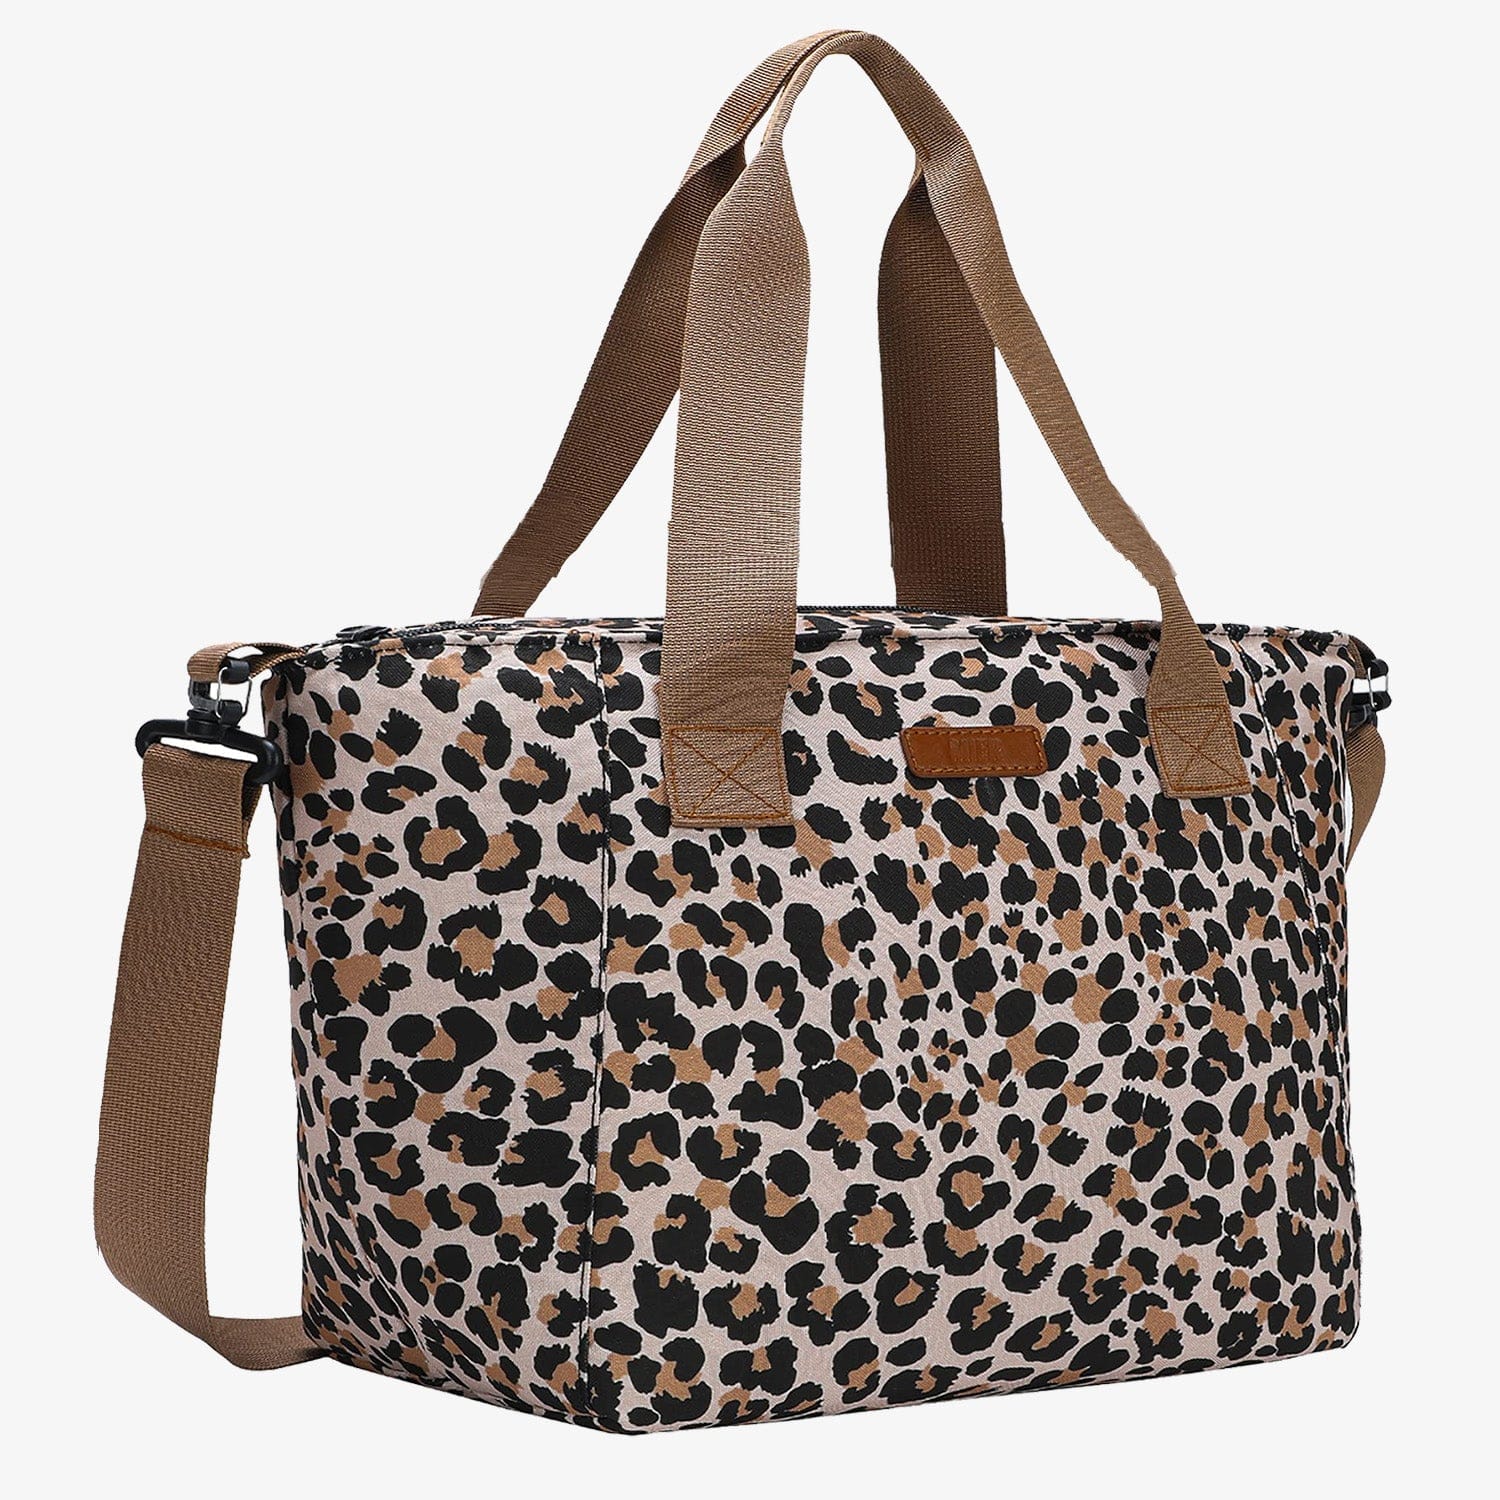 Large Lightweight Insulated Lunch Bag Travel Bag for Women Fashionable Lunch Bag Leopard MIER